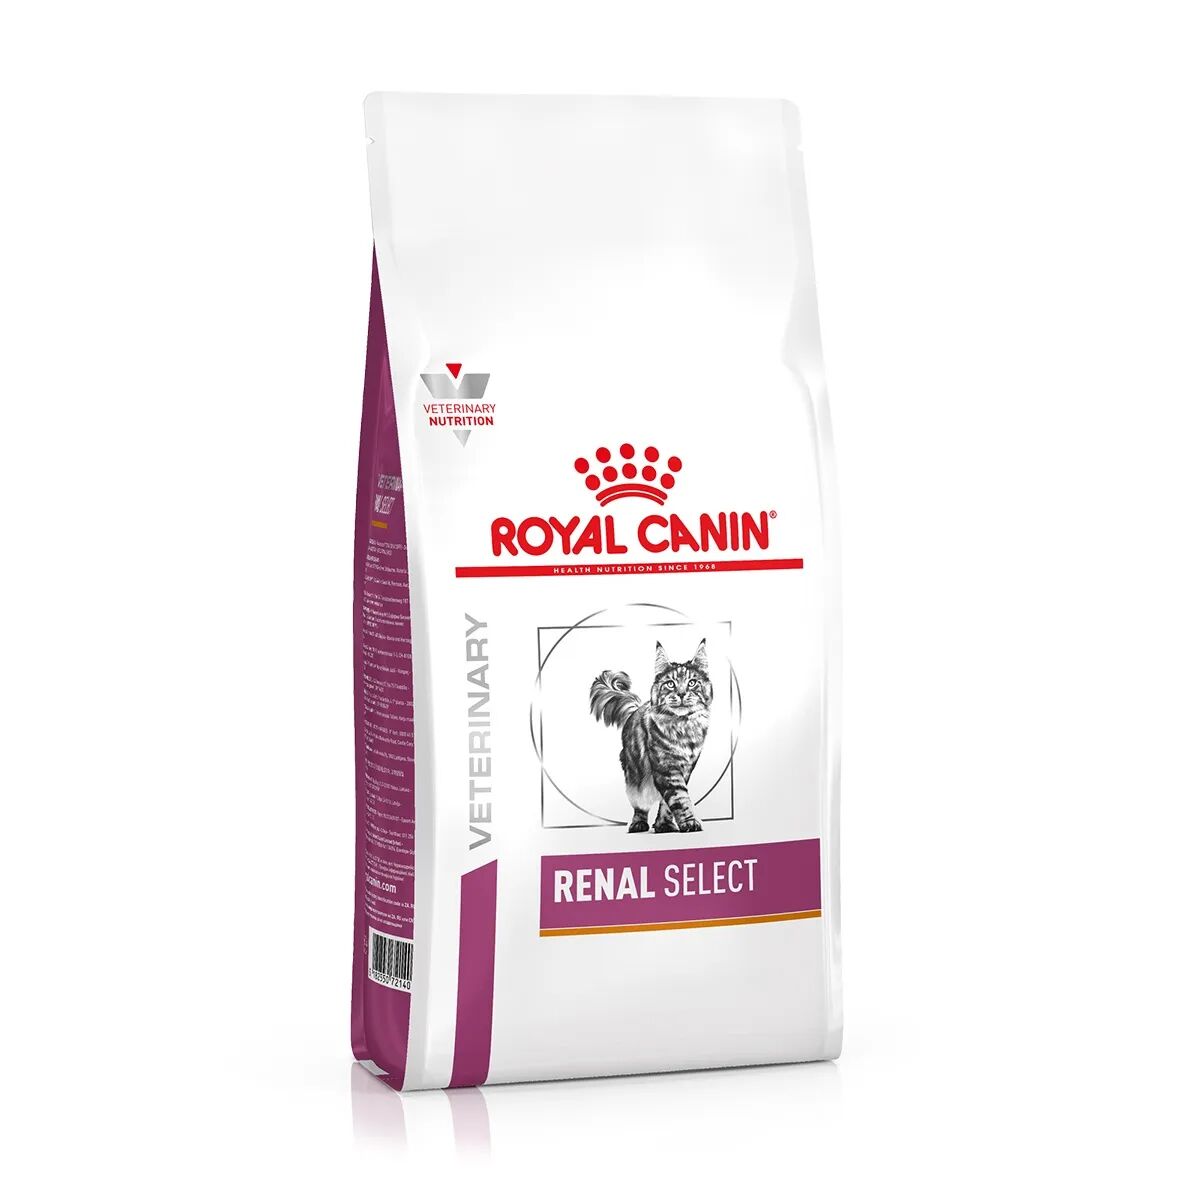 ROYAL CANIN V-Diet Renal Select Gatto 2KG